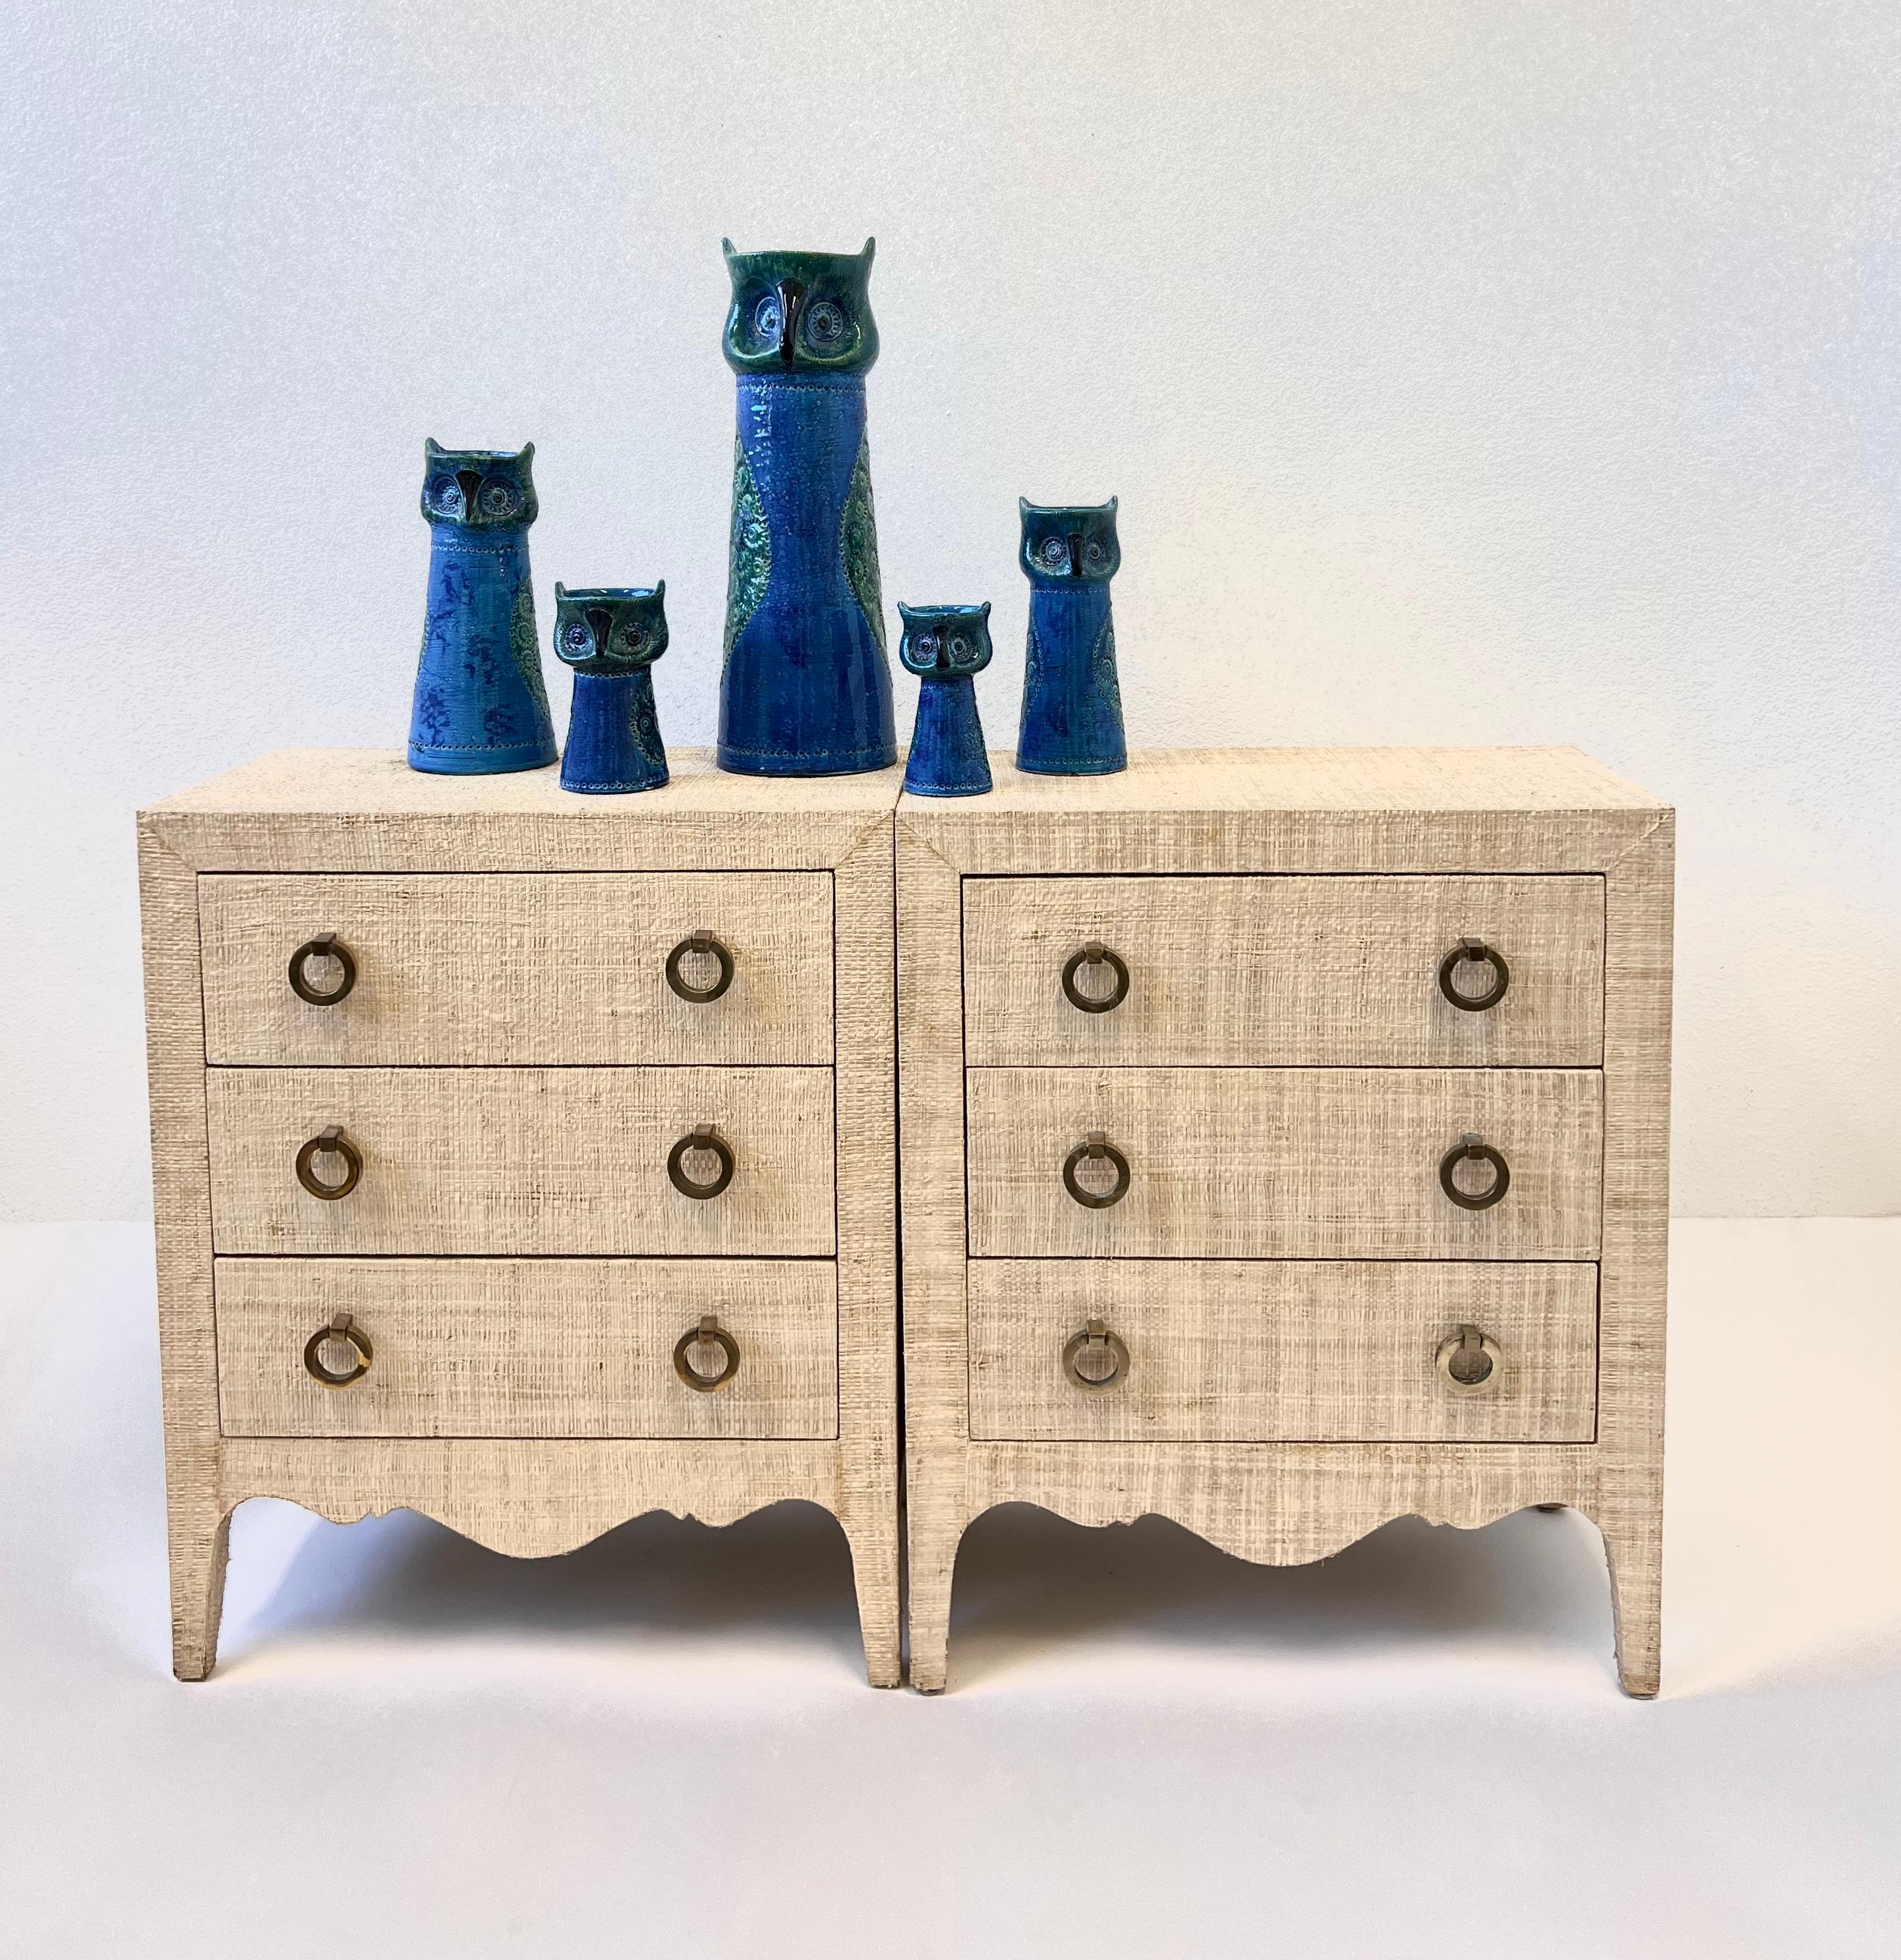 Mid-20th Century Grouping of Five Italian Ceramic Owls by Ado Londi for Bitossi  For Sale